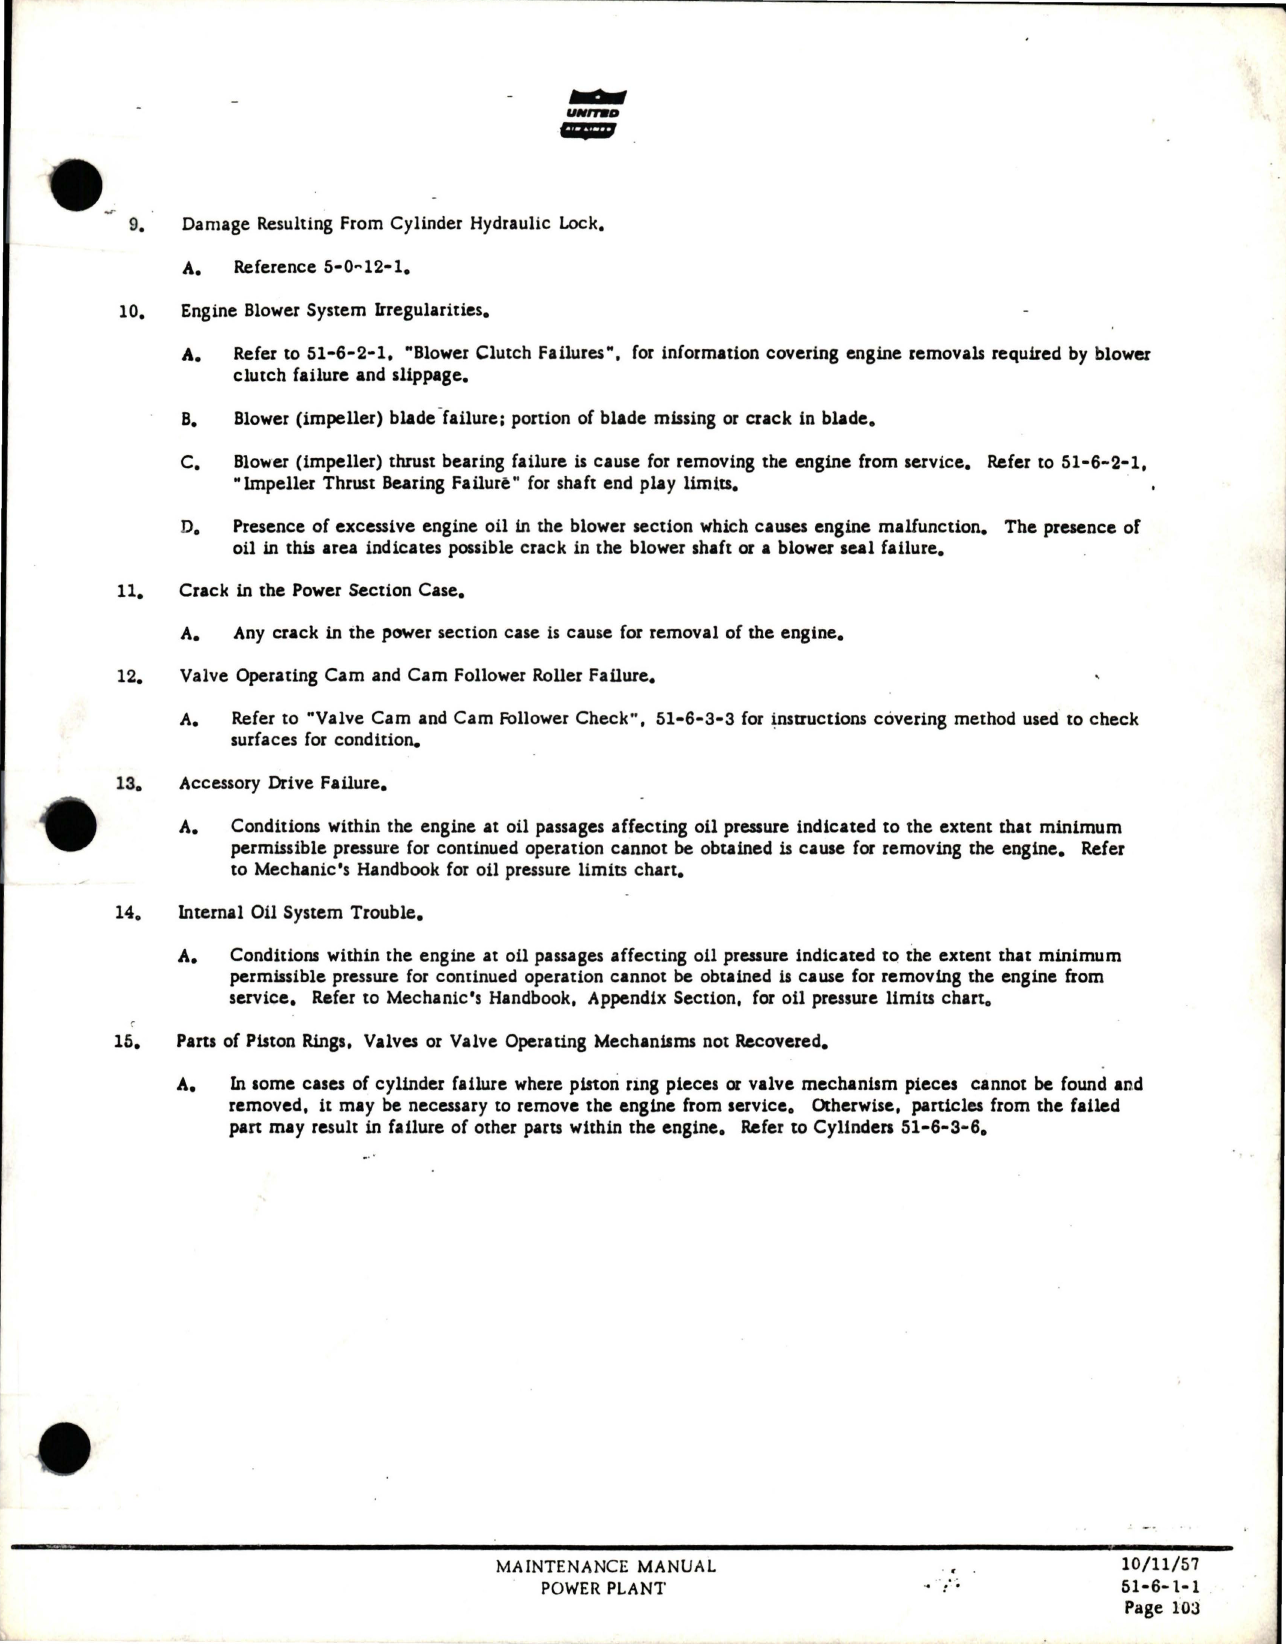 Sample page 5 from AirCorps Library document: Maintenance Manual for Power Plant - DC-6, DC-6A, DC-6B, CV-340, DC-7